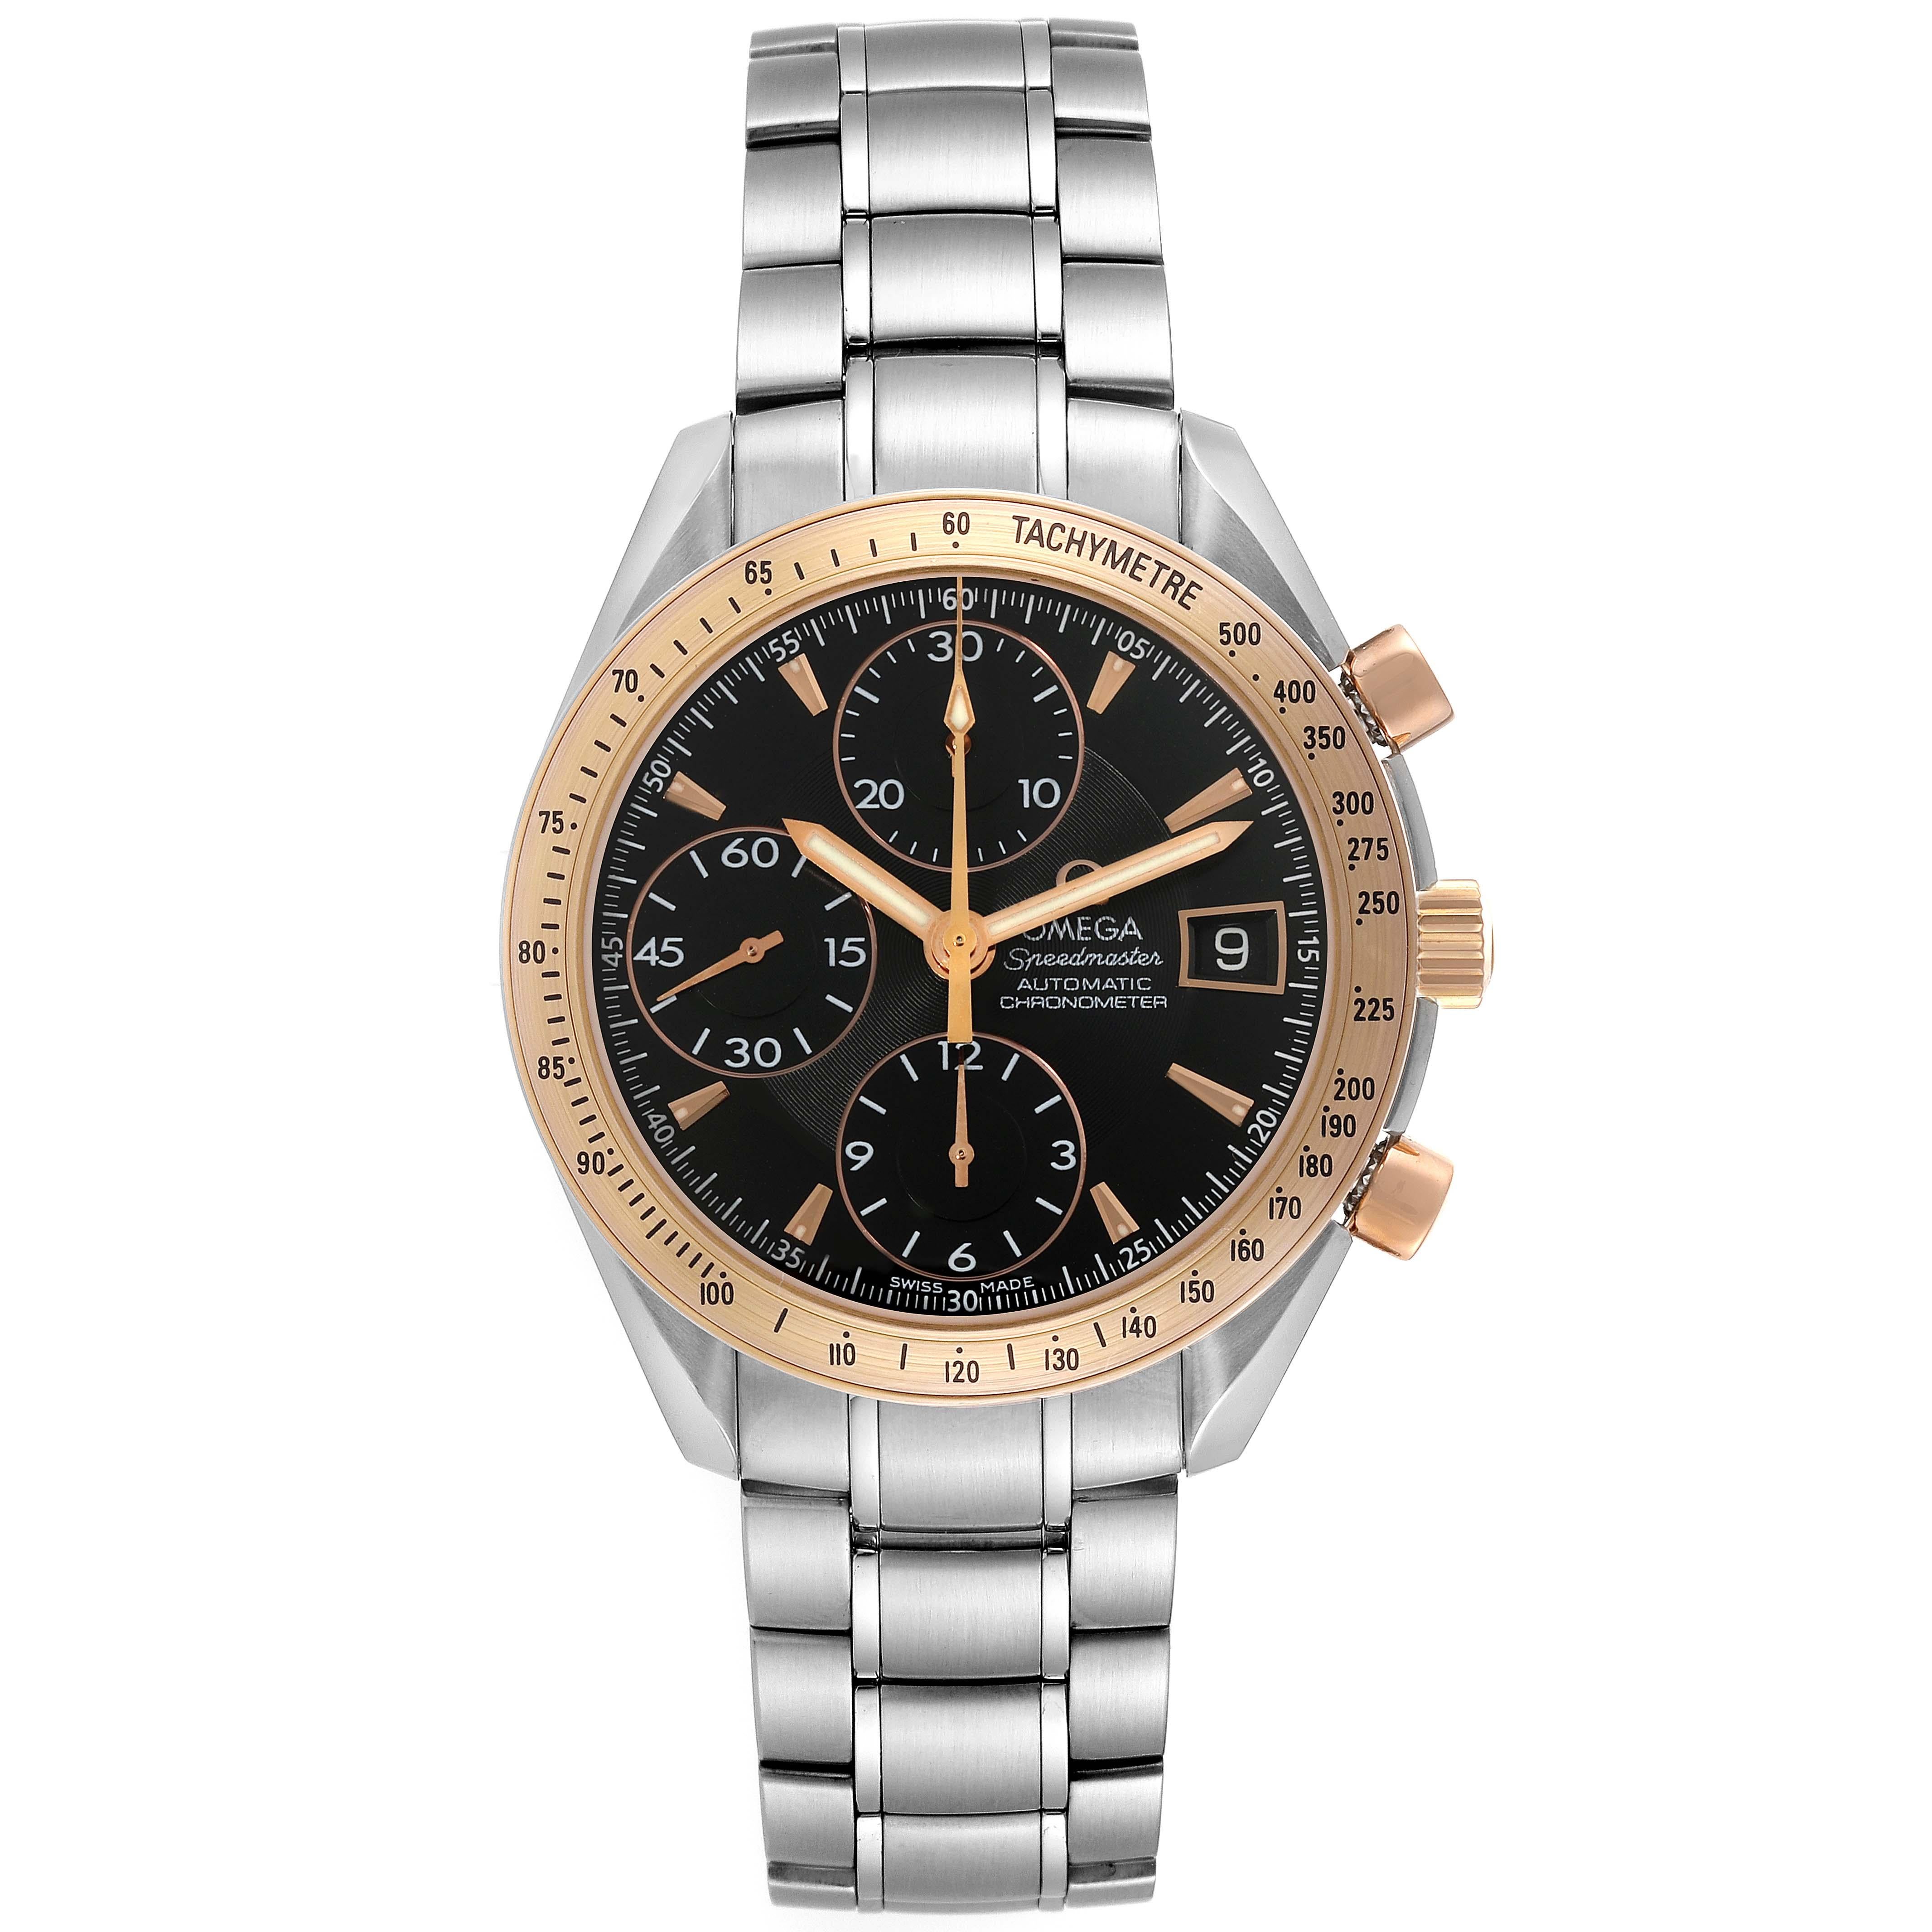 Omega Speedmaster 8157 Steel Rose Gold Mens Watch 323.21.40.40.01.001 Box Card. Automatic self-winding winding chronograph movement. Stainless steel round case 40 mm in diameter. Omega logo on an 18k rose gold crown. 18k rose gold bezel with